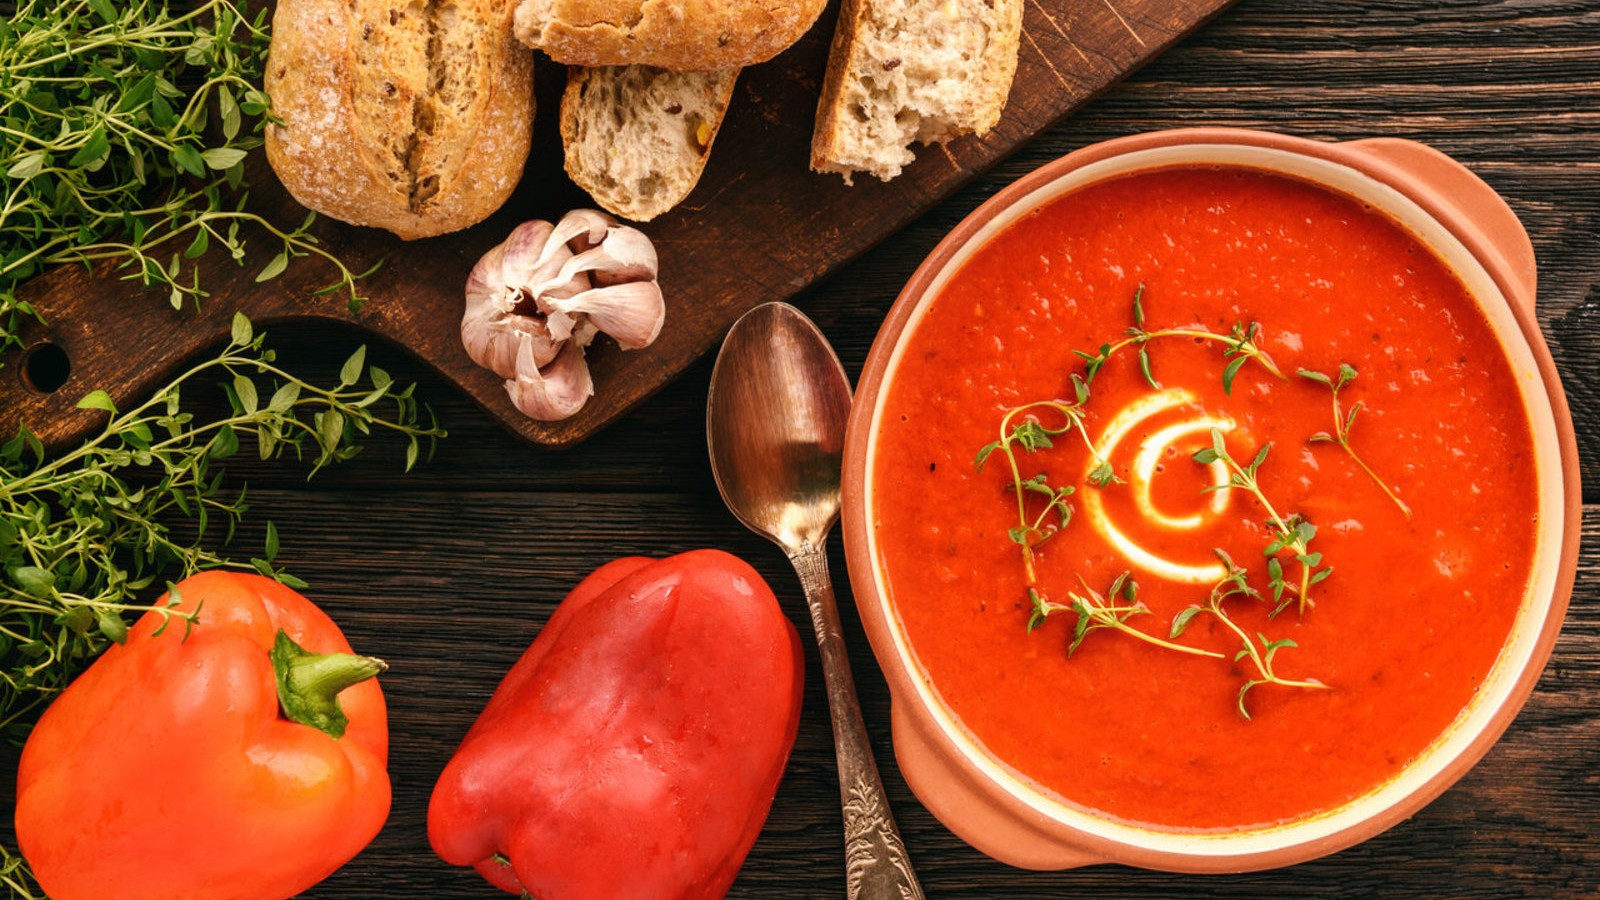 Image of Roasted Red Pepper & Tomato Soup